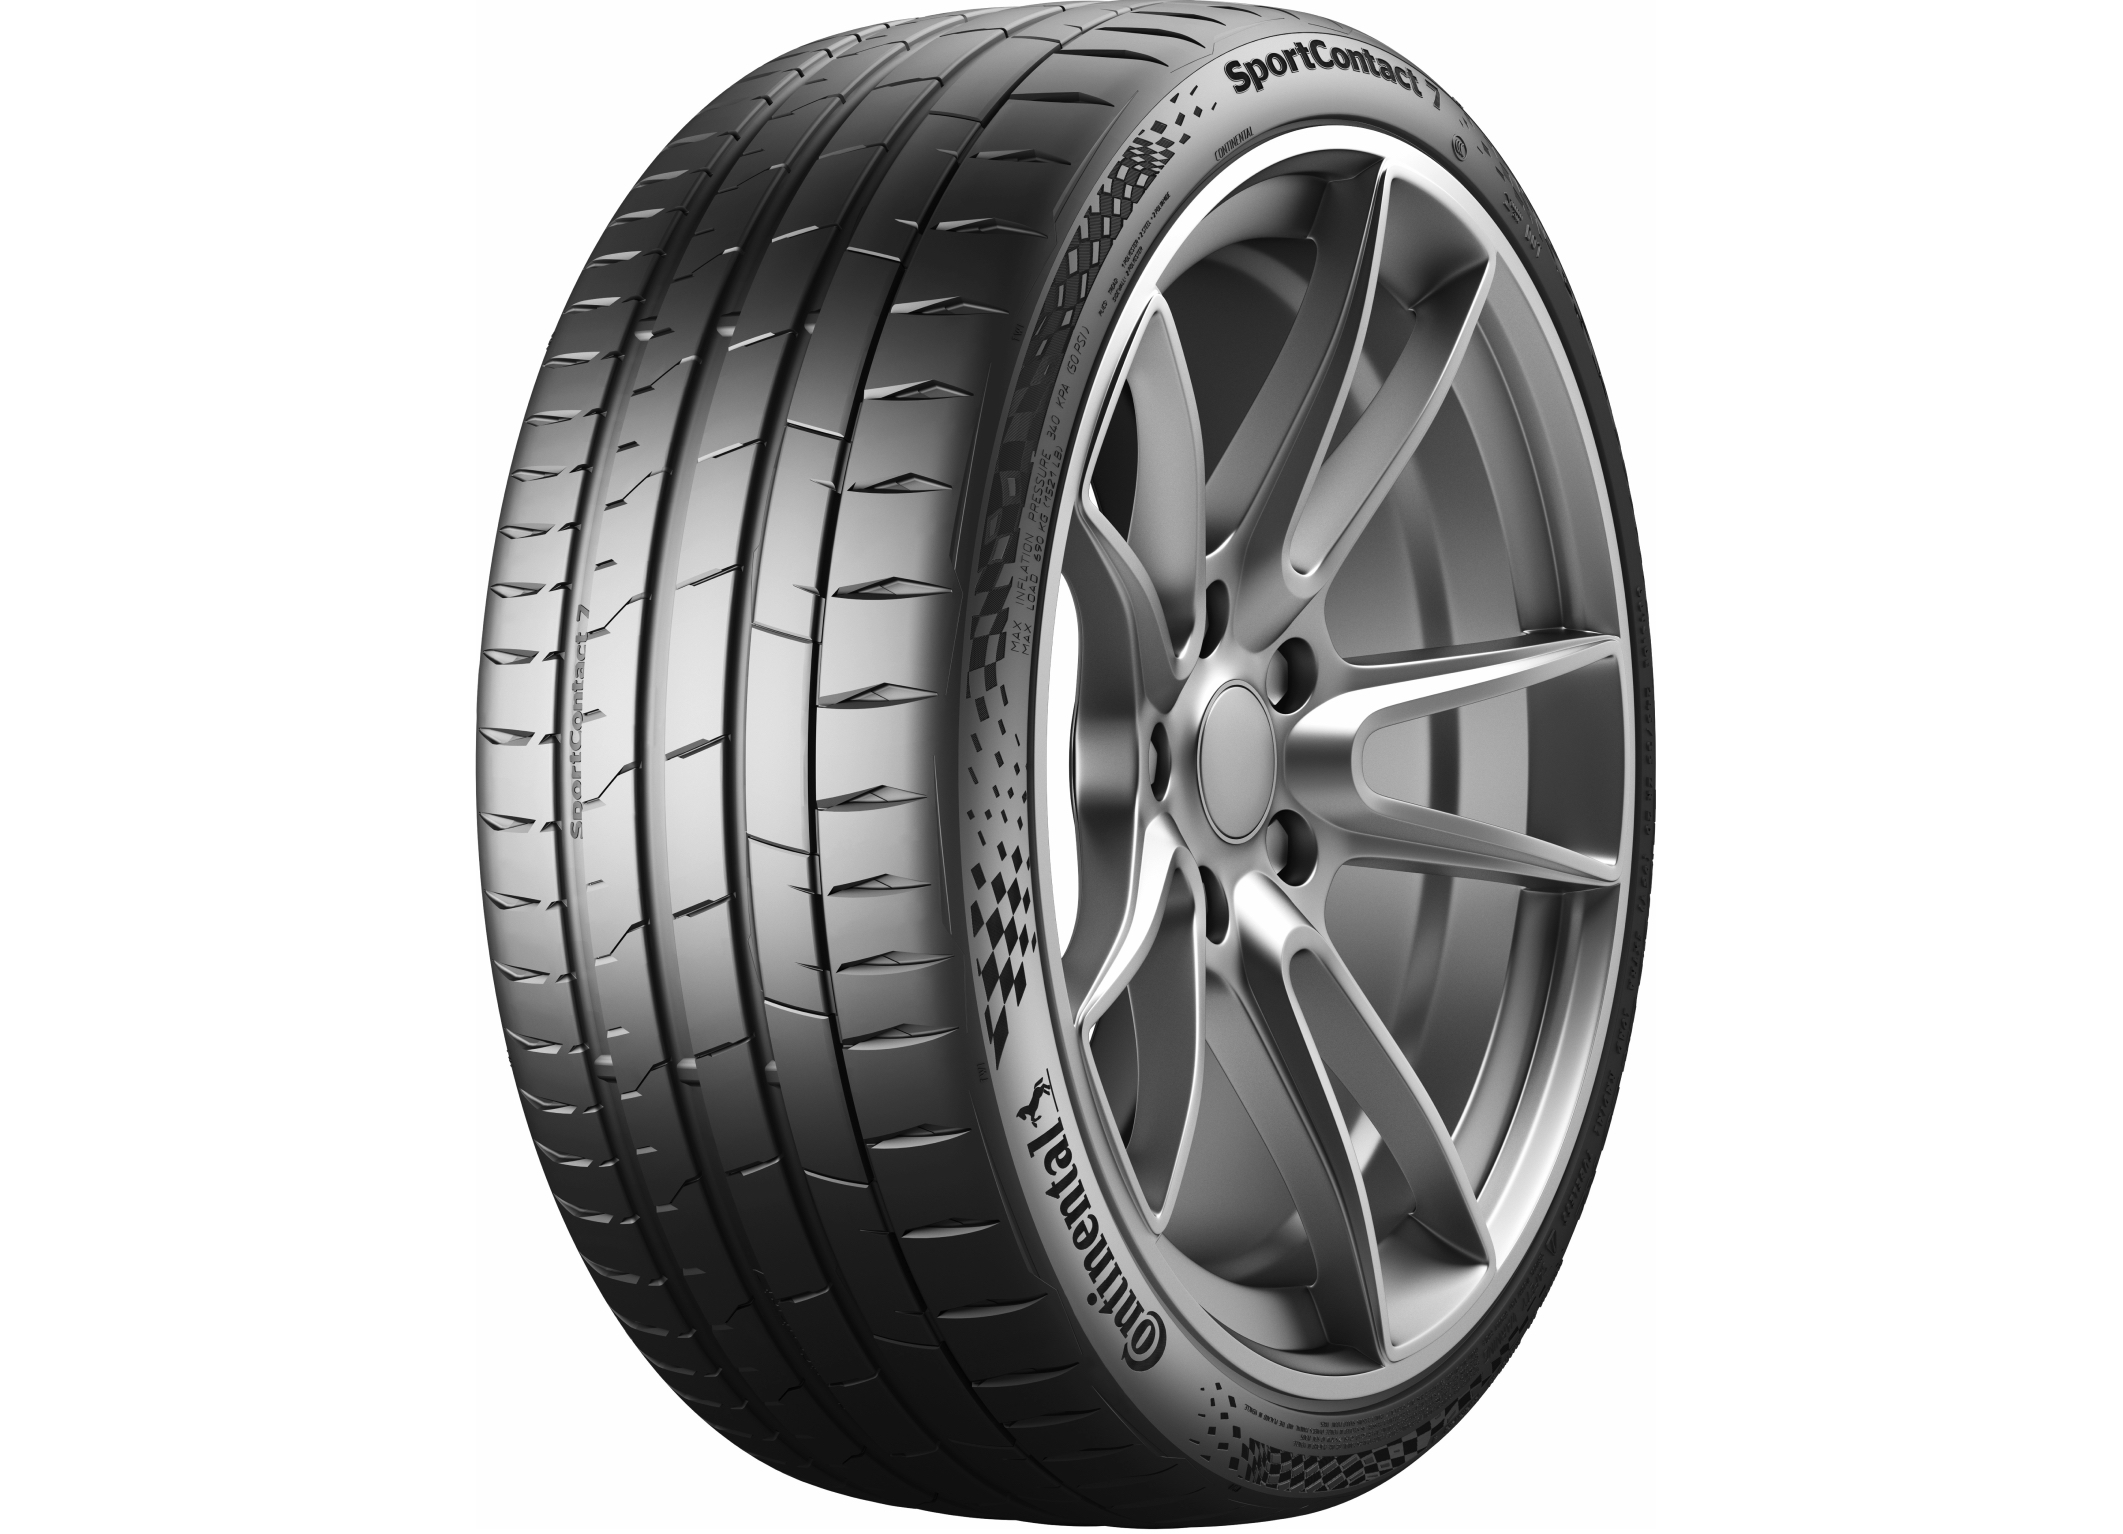 Continental the most powerful for the supplier exclusive Continental is supercar tire Brabus - yet AG